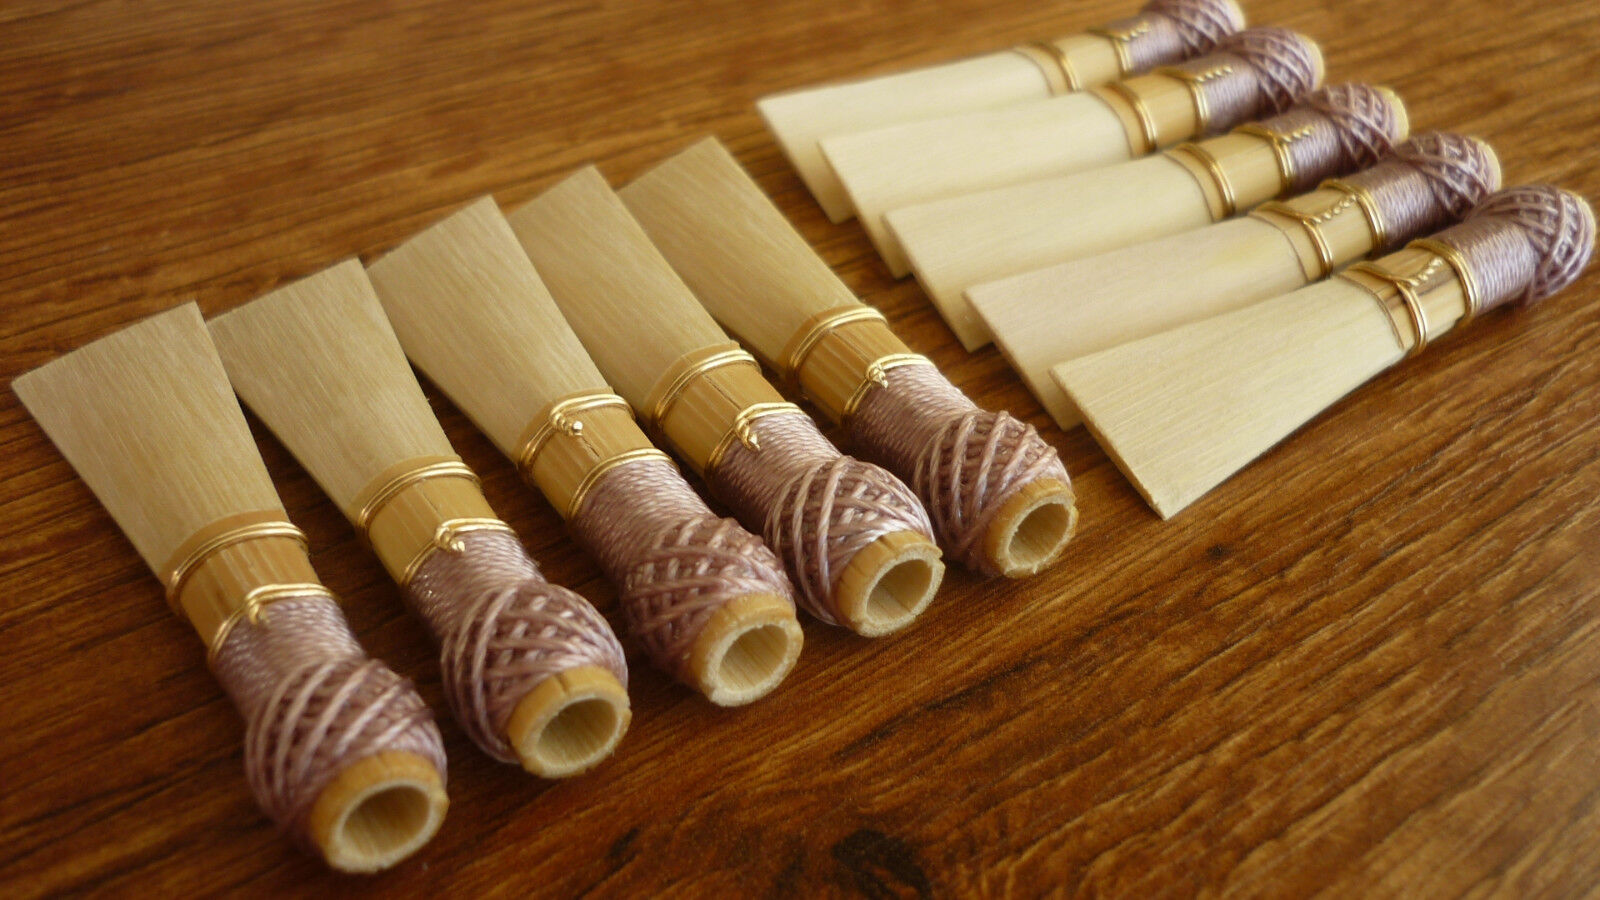 10 high quality bassoon reed blanks from Lavoro cane F2 /dukov_r